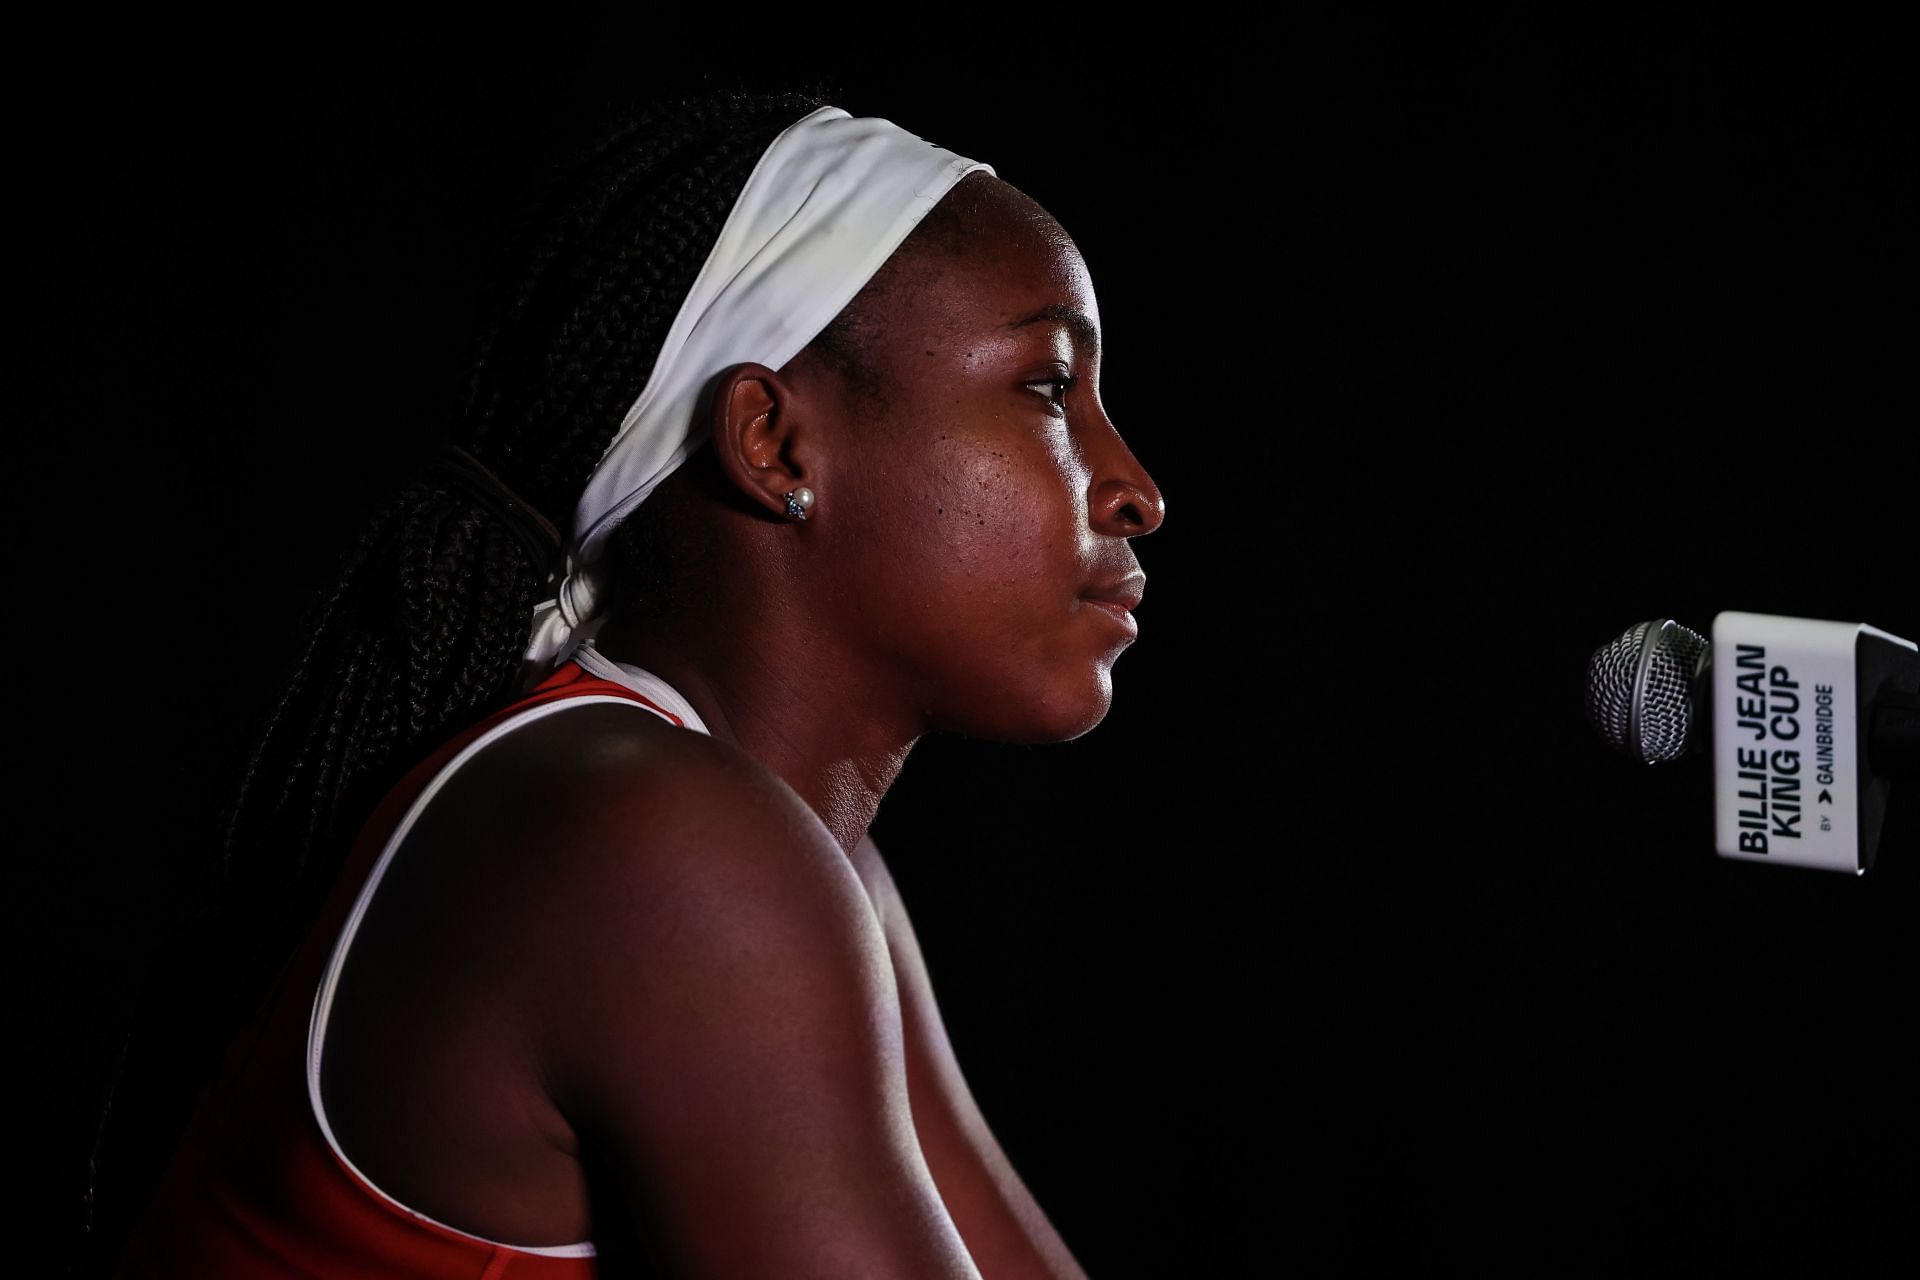 Coco Gauff at the 2023 Billie Jean King Cup Qualifiers